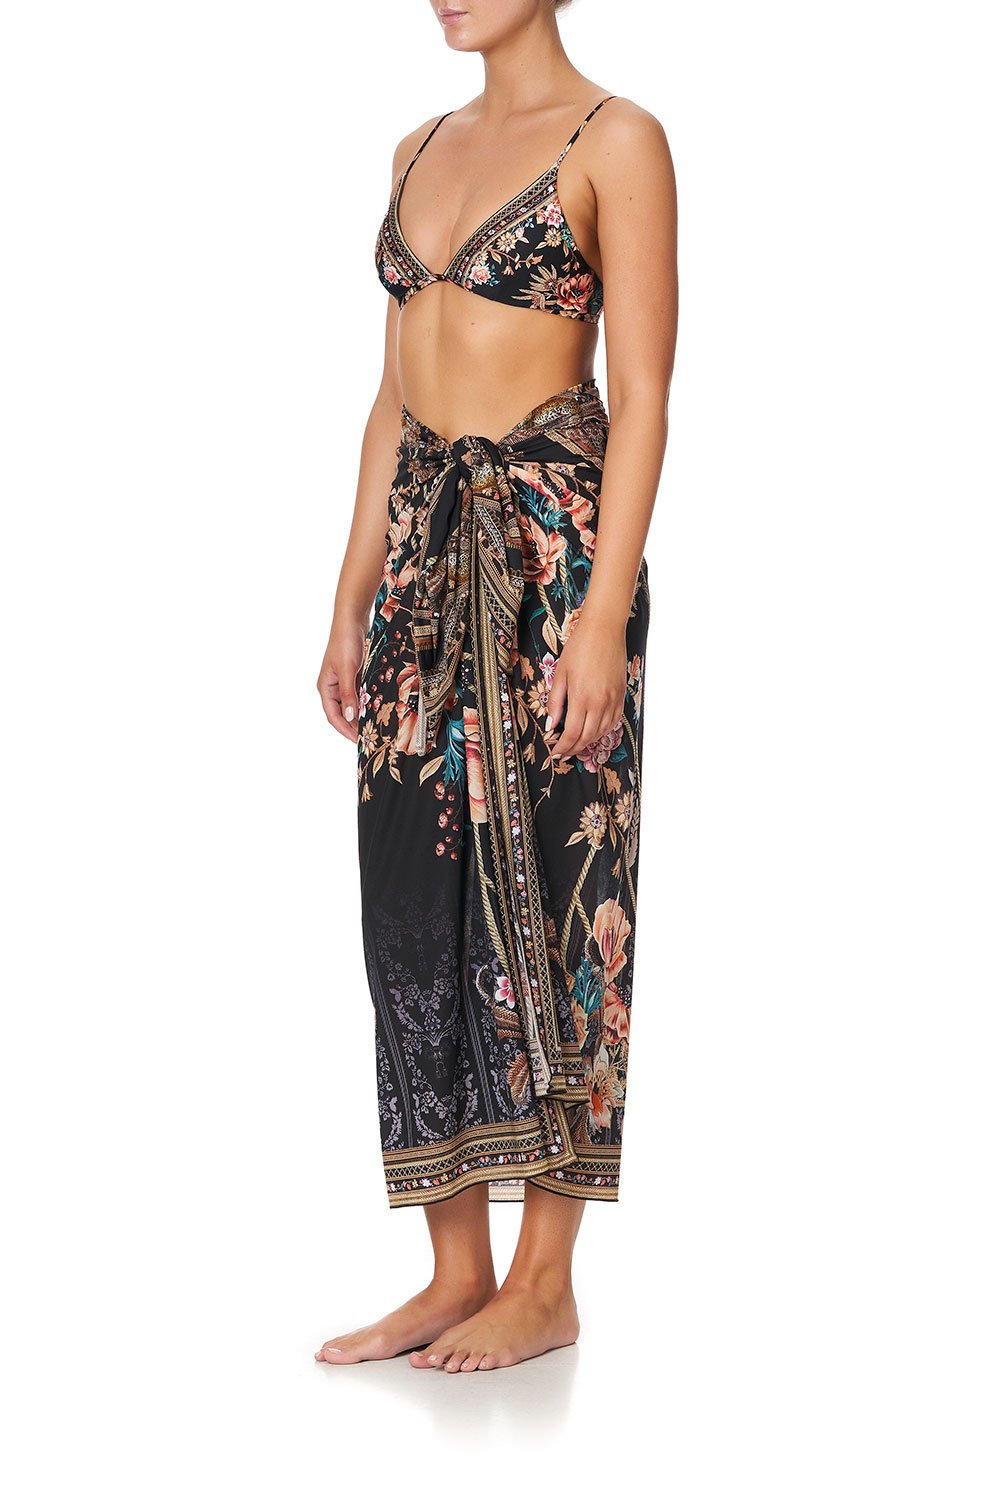 LONG SARONG BELLE OF THE BAROQUE